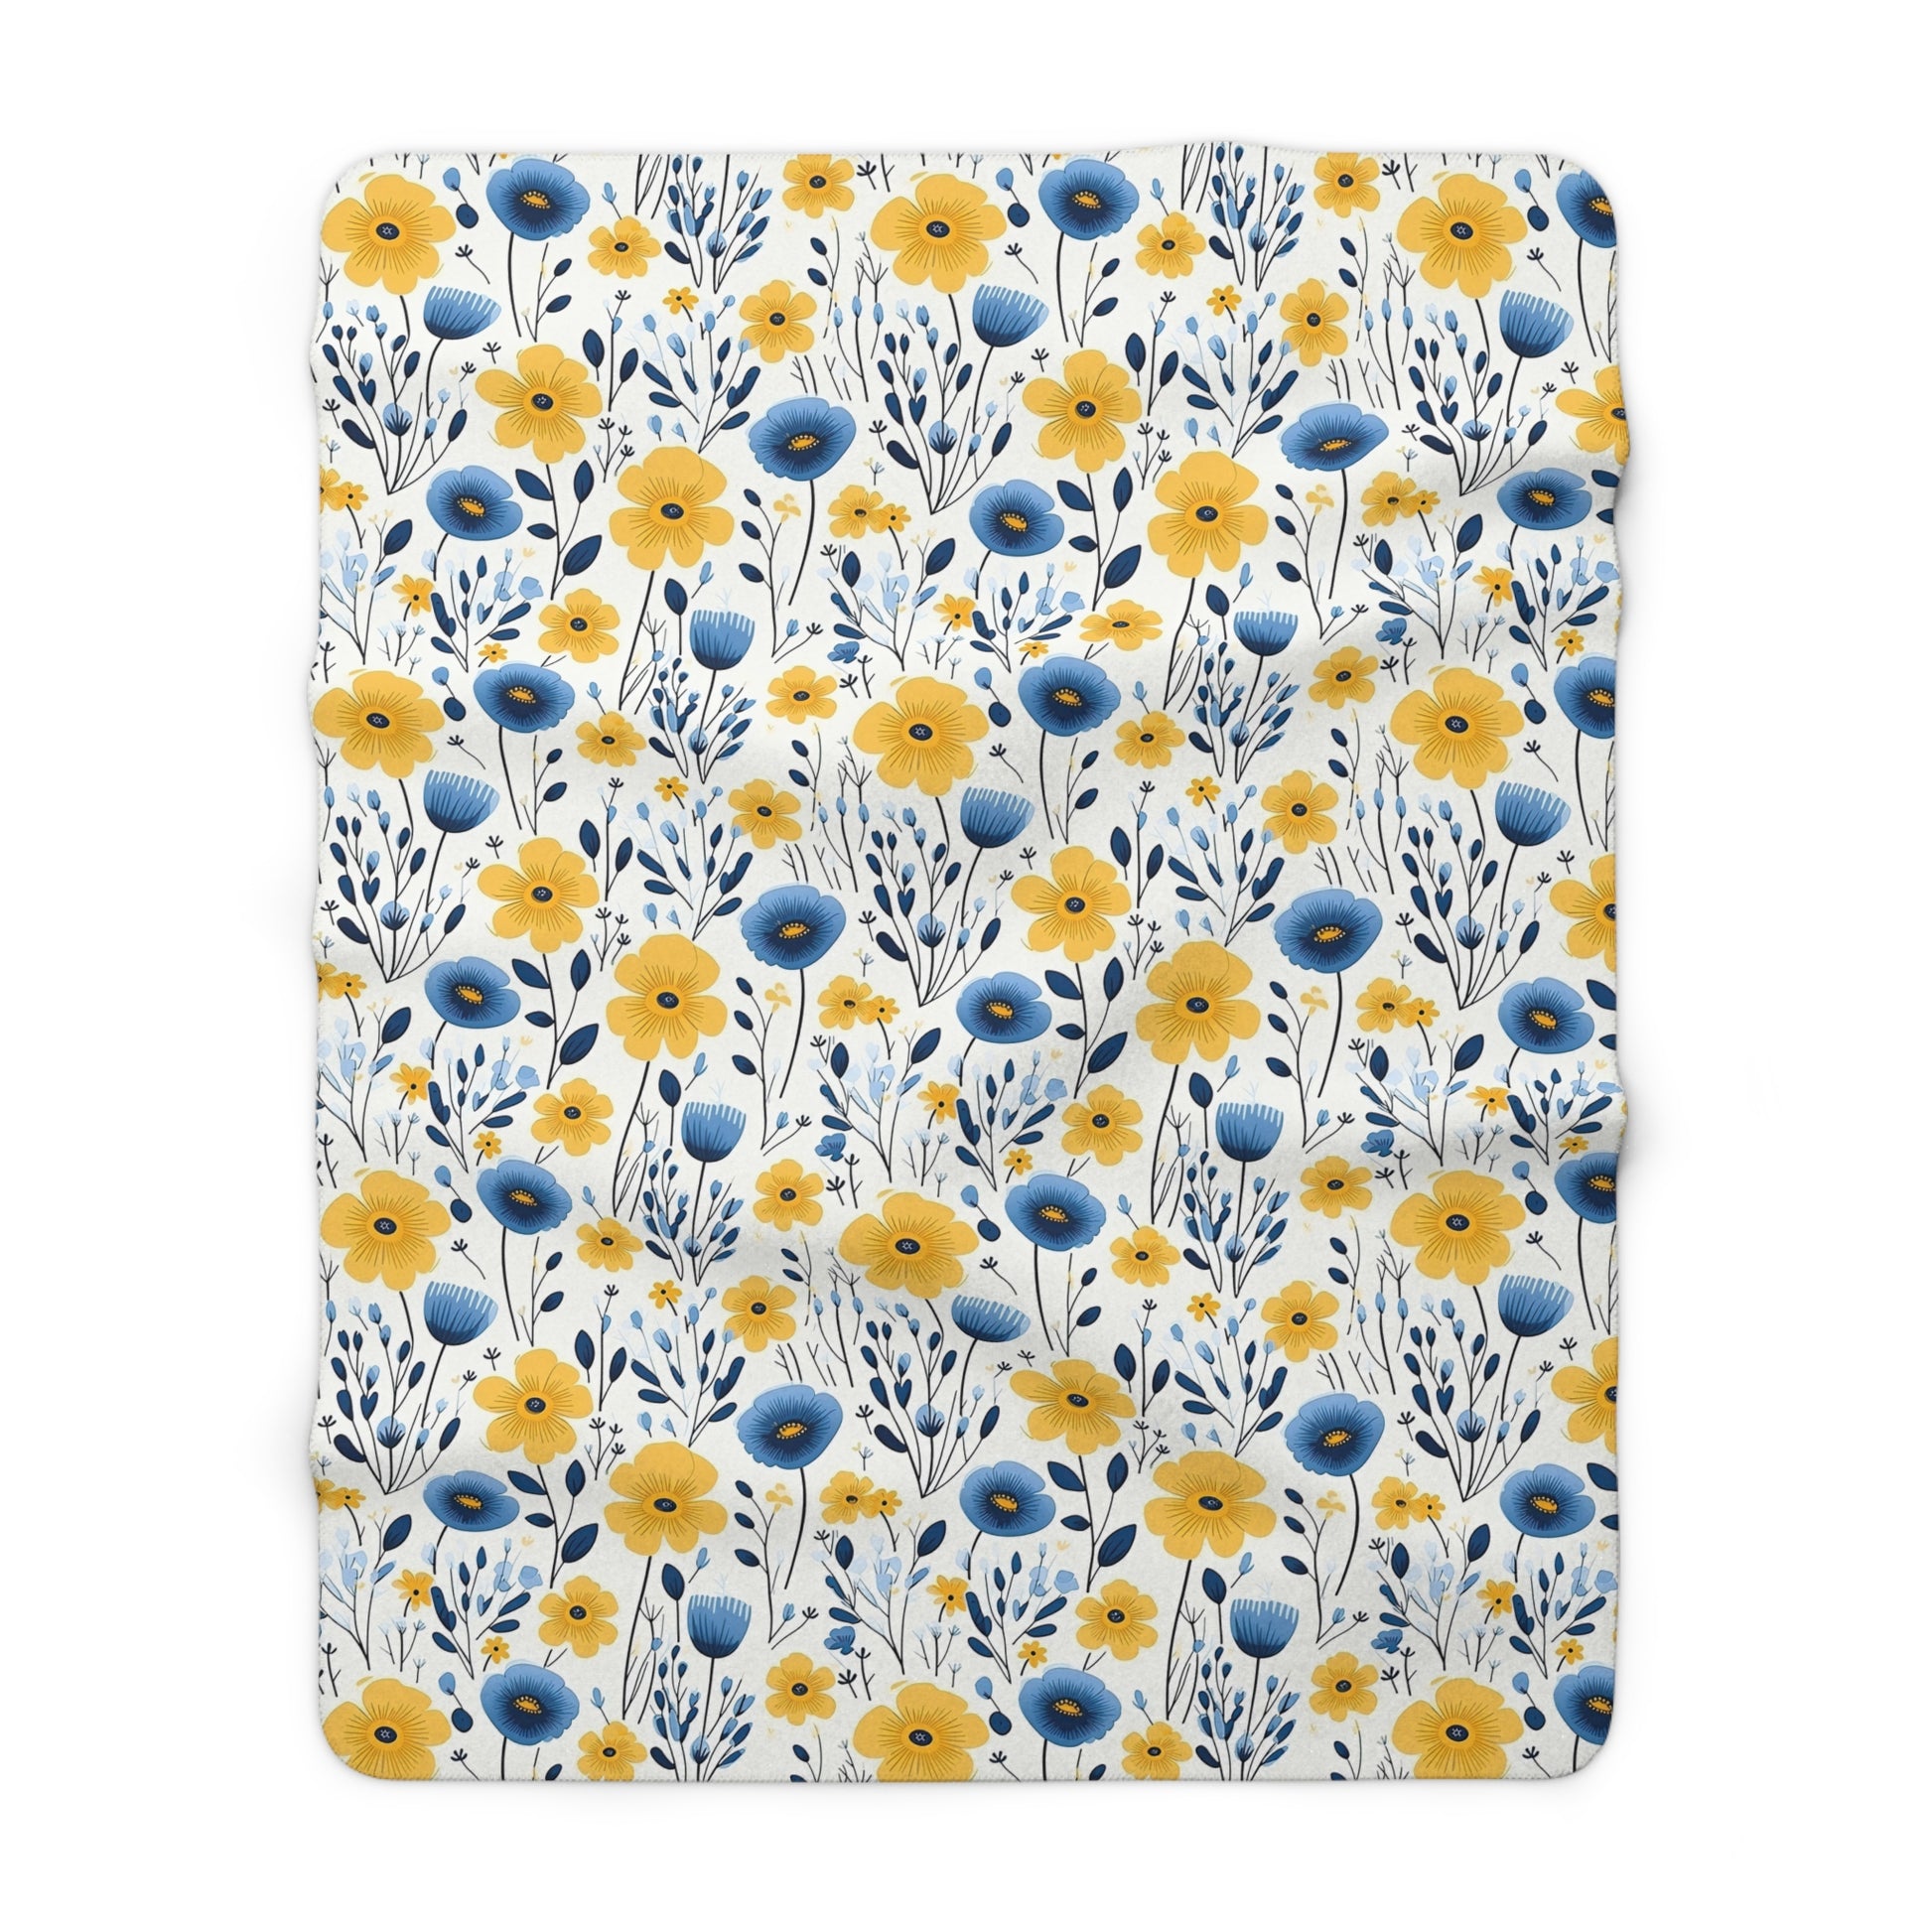 Floral Blue and Yellow Sherpa Fleece Blanket - Watercolor Floral Blanket